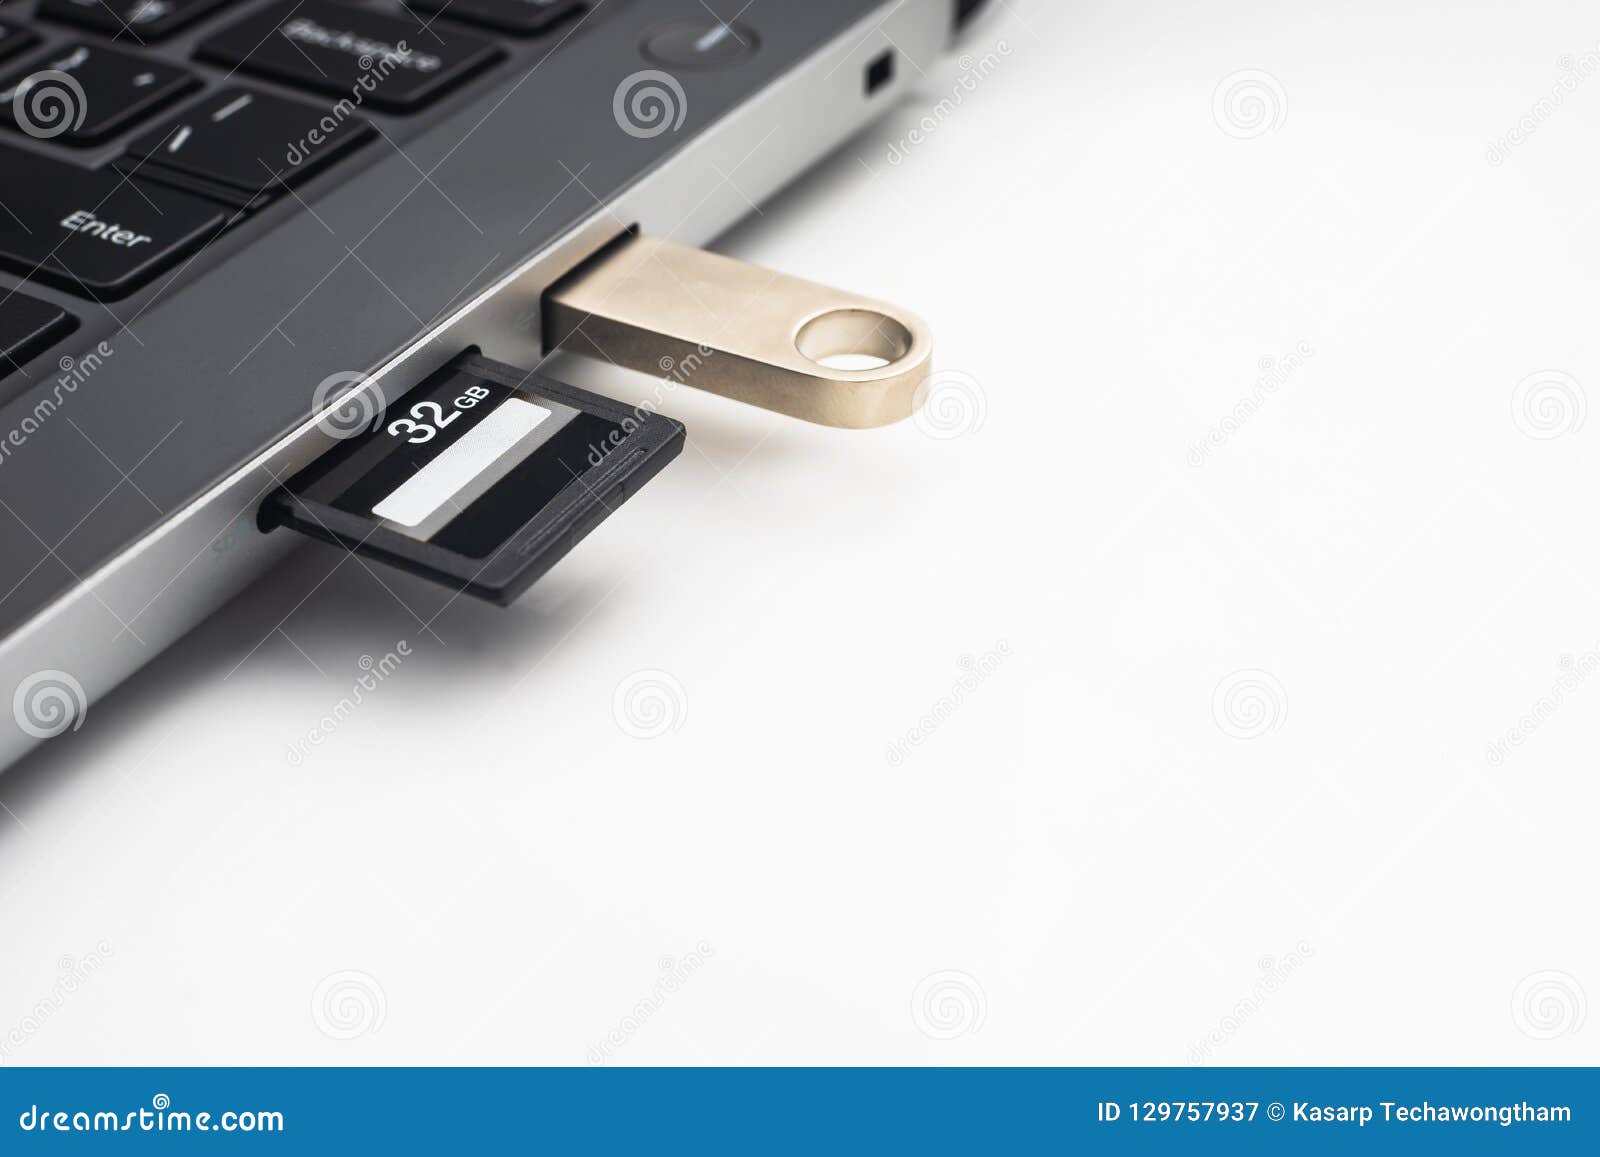 a USB Flash Drive and Sd Card Computer Laptop. Not Stock Image - Image of connect, 129757937